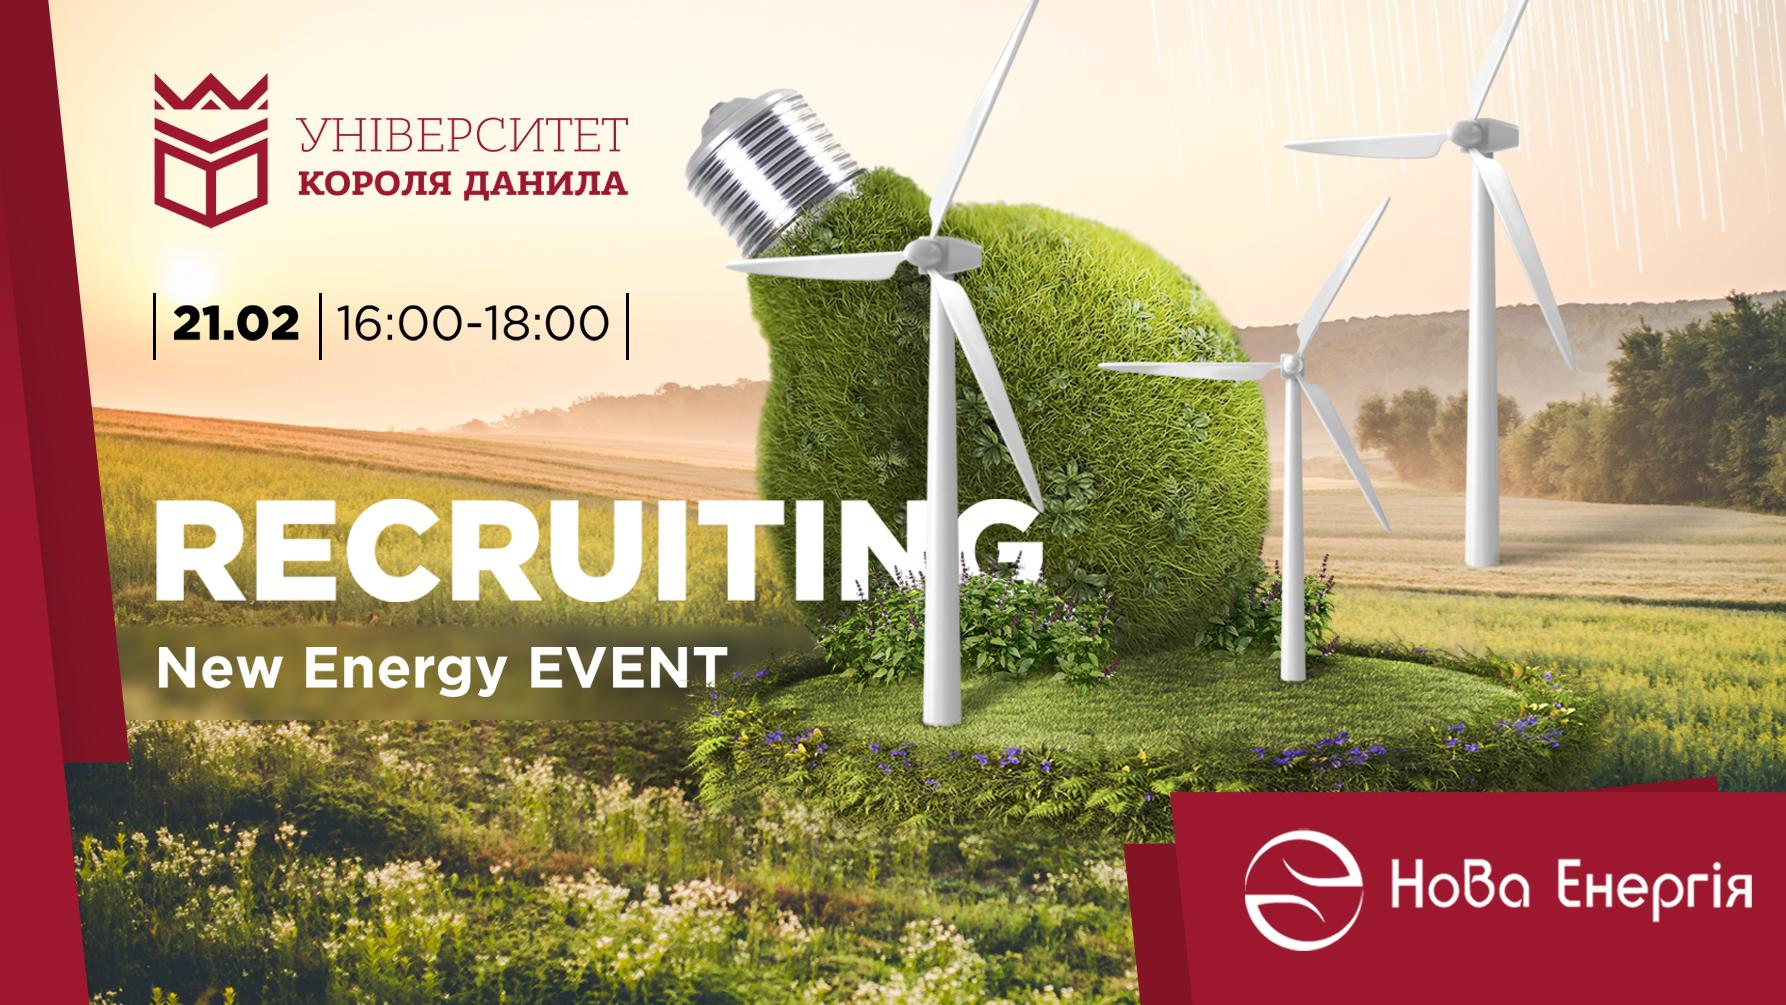 RECRUITING New Energy EVENT